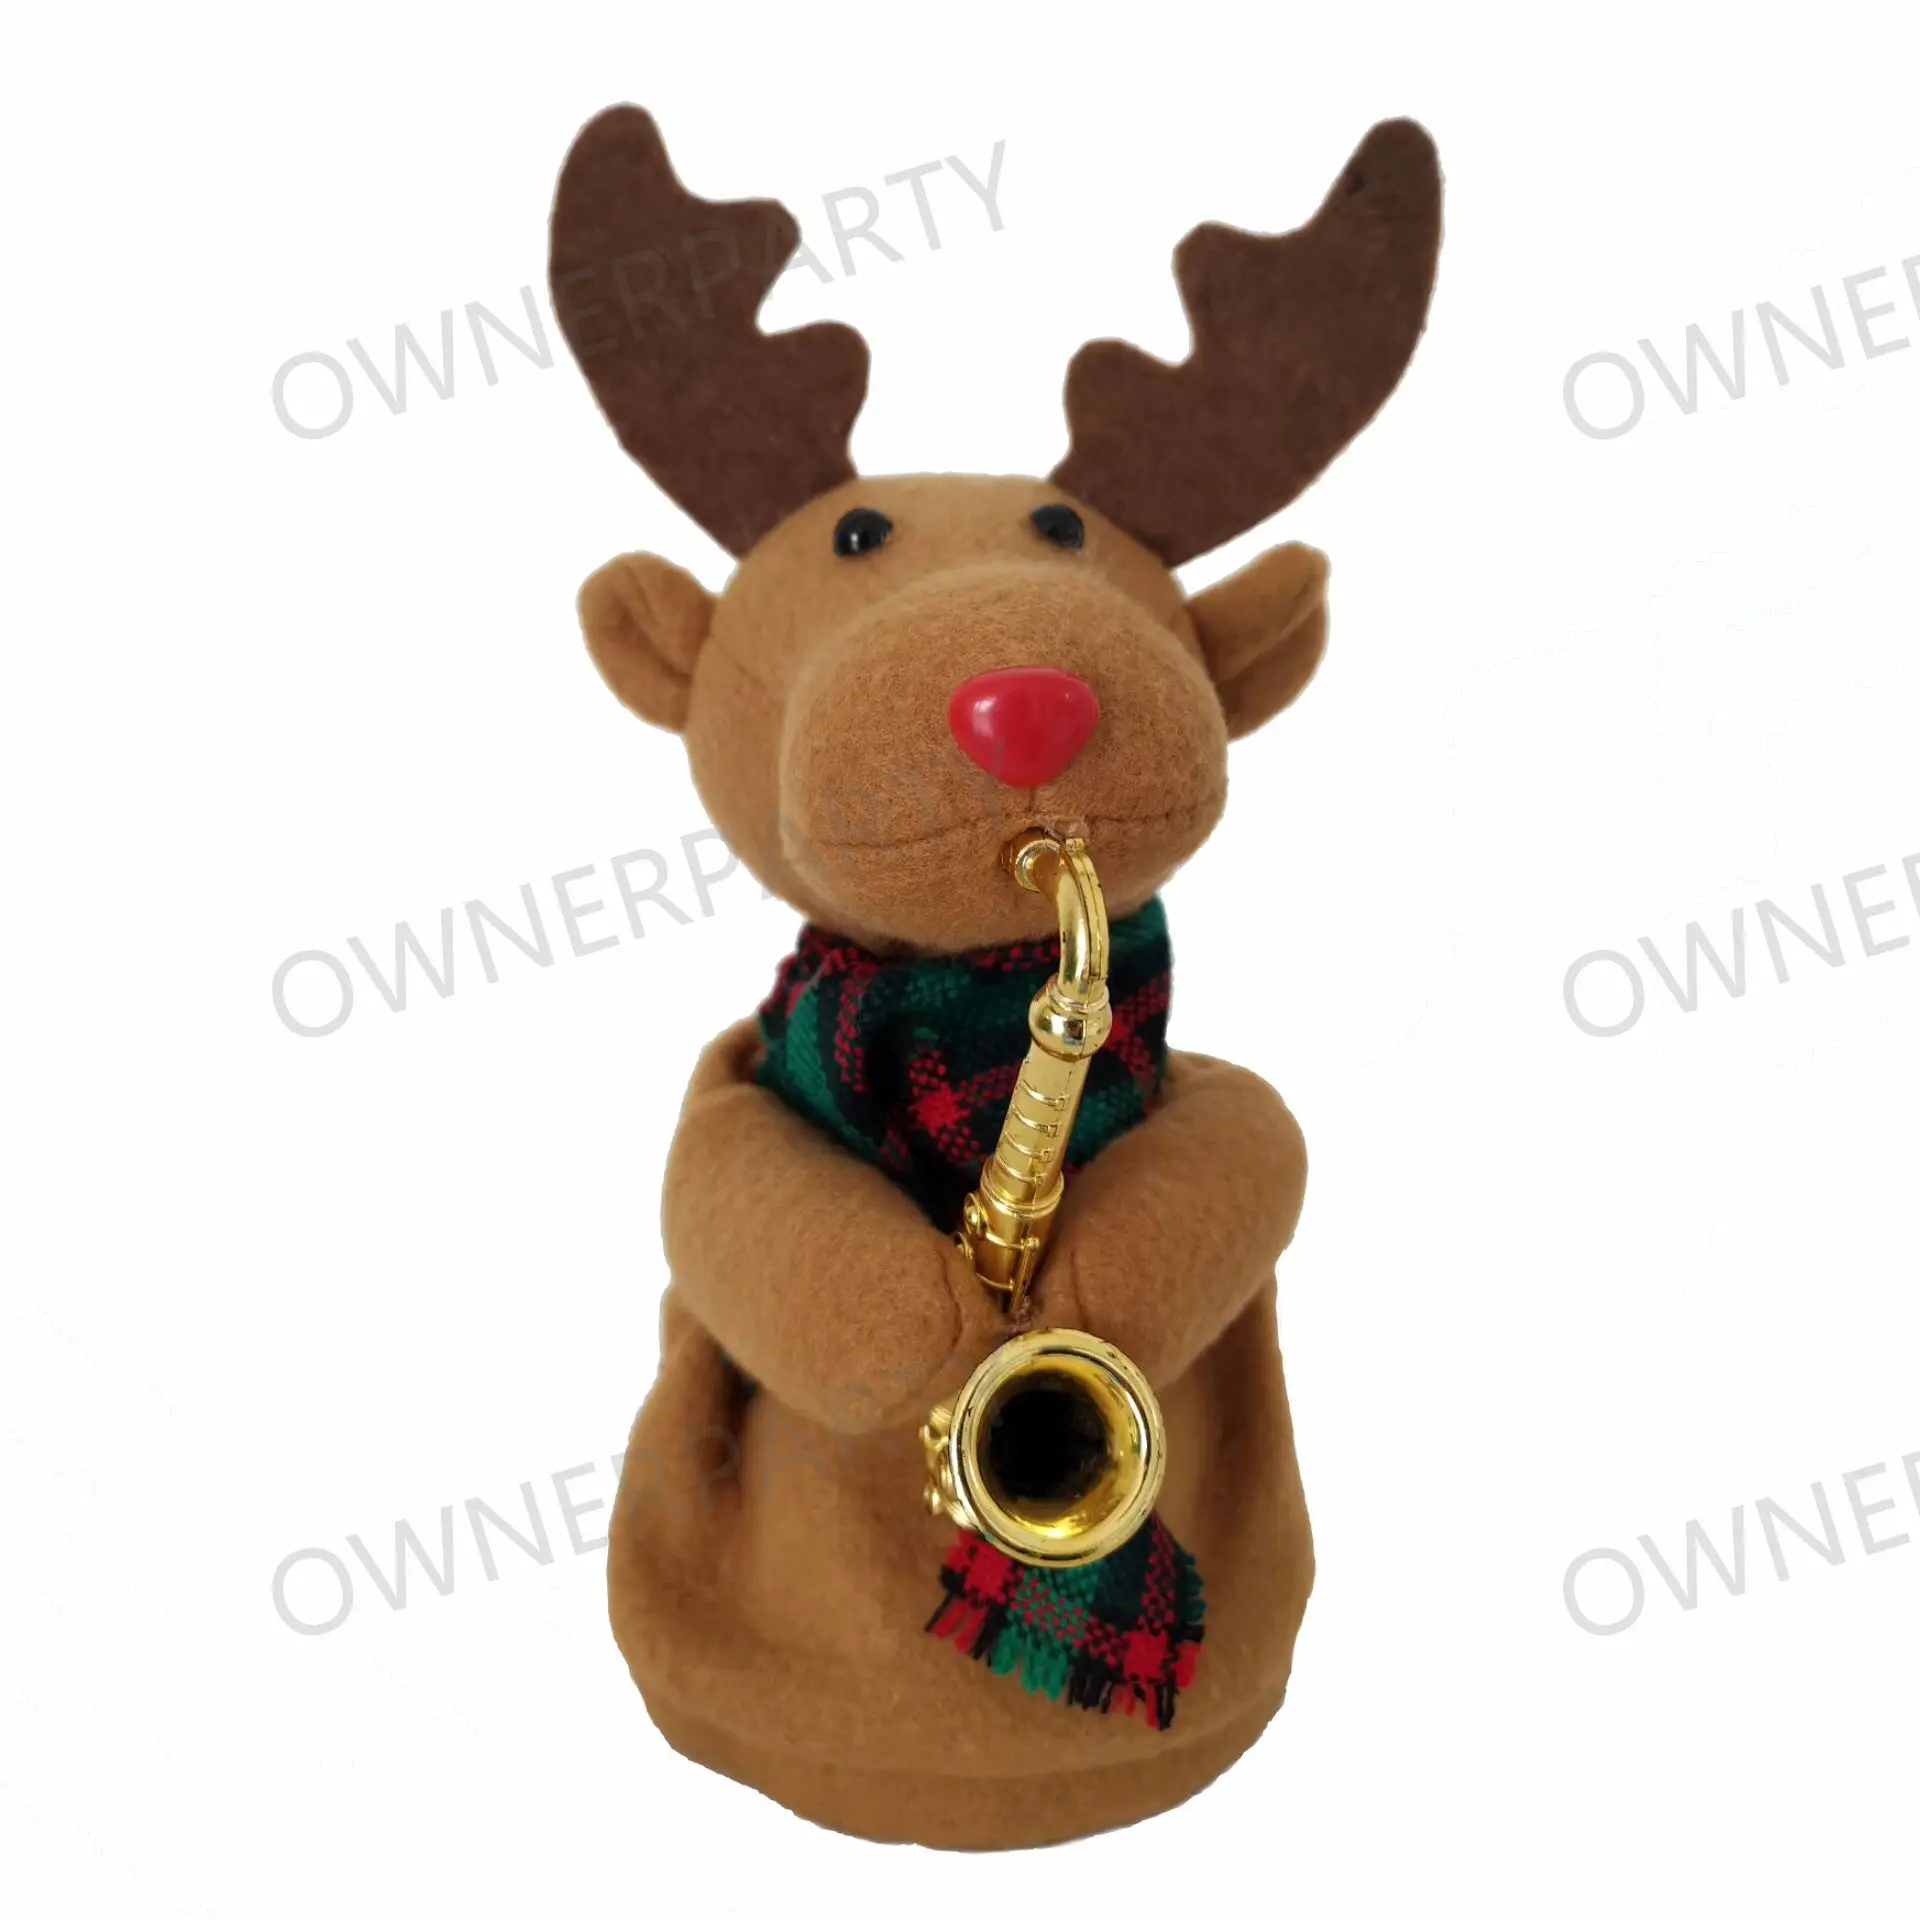 Indoor Dancing Reindeer Christmas Gifts Decorations Christmas Decoration Supplies For Home Party Xmas Decor